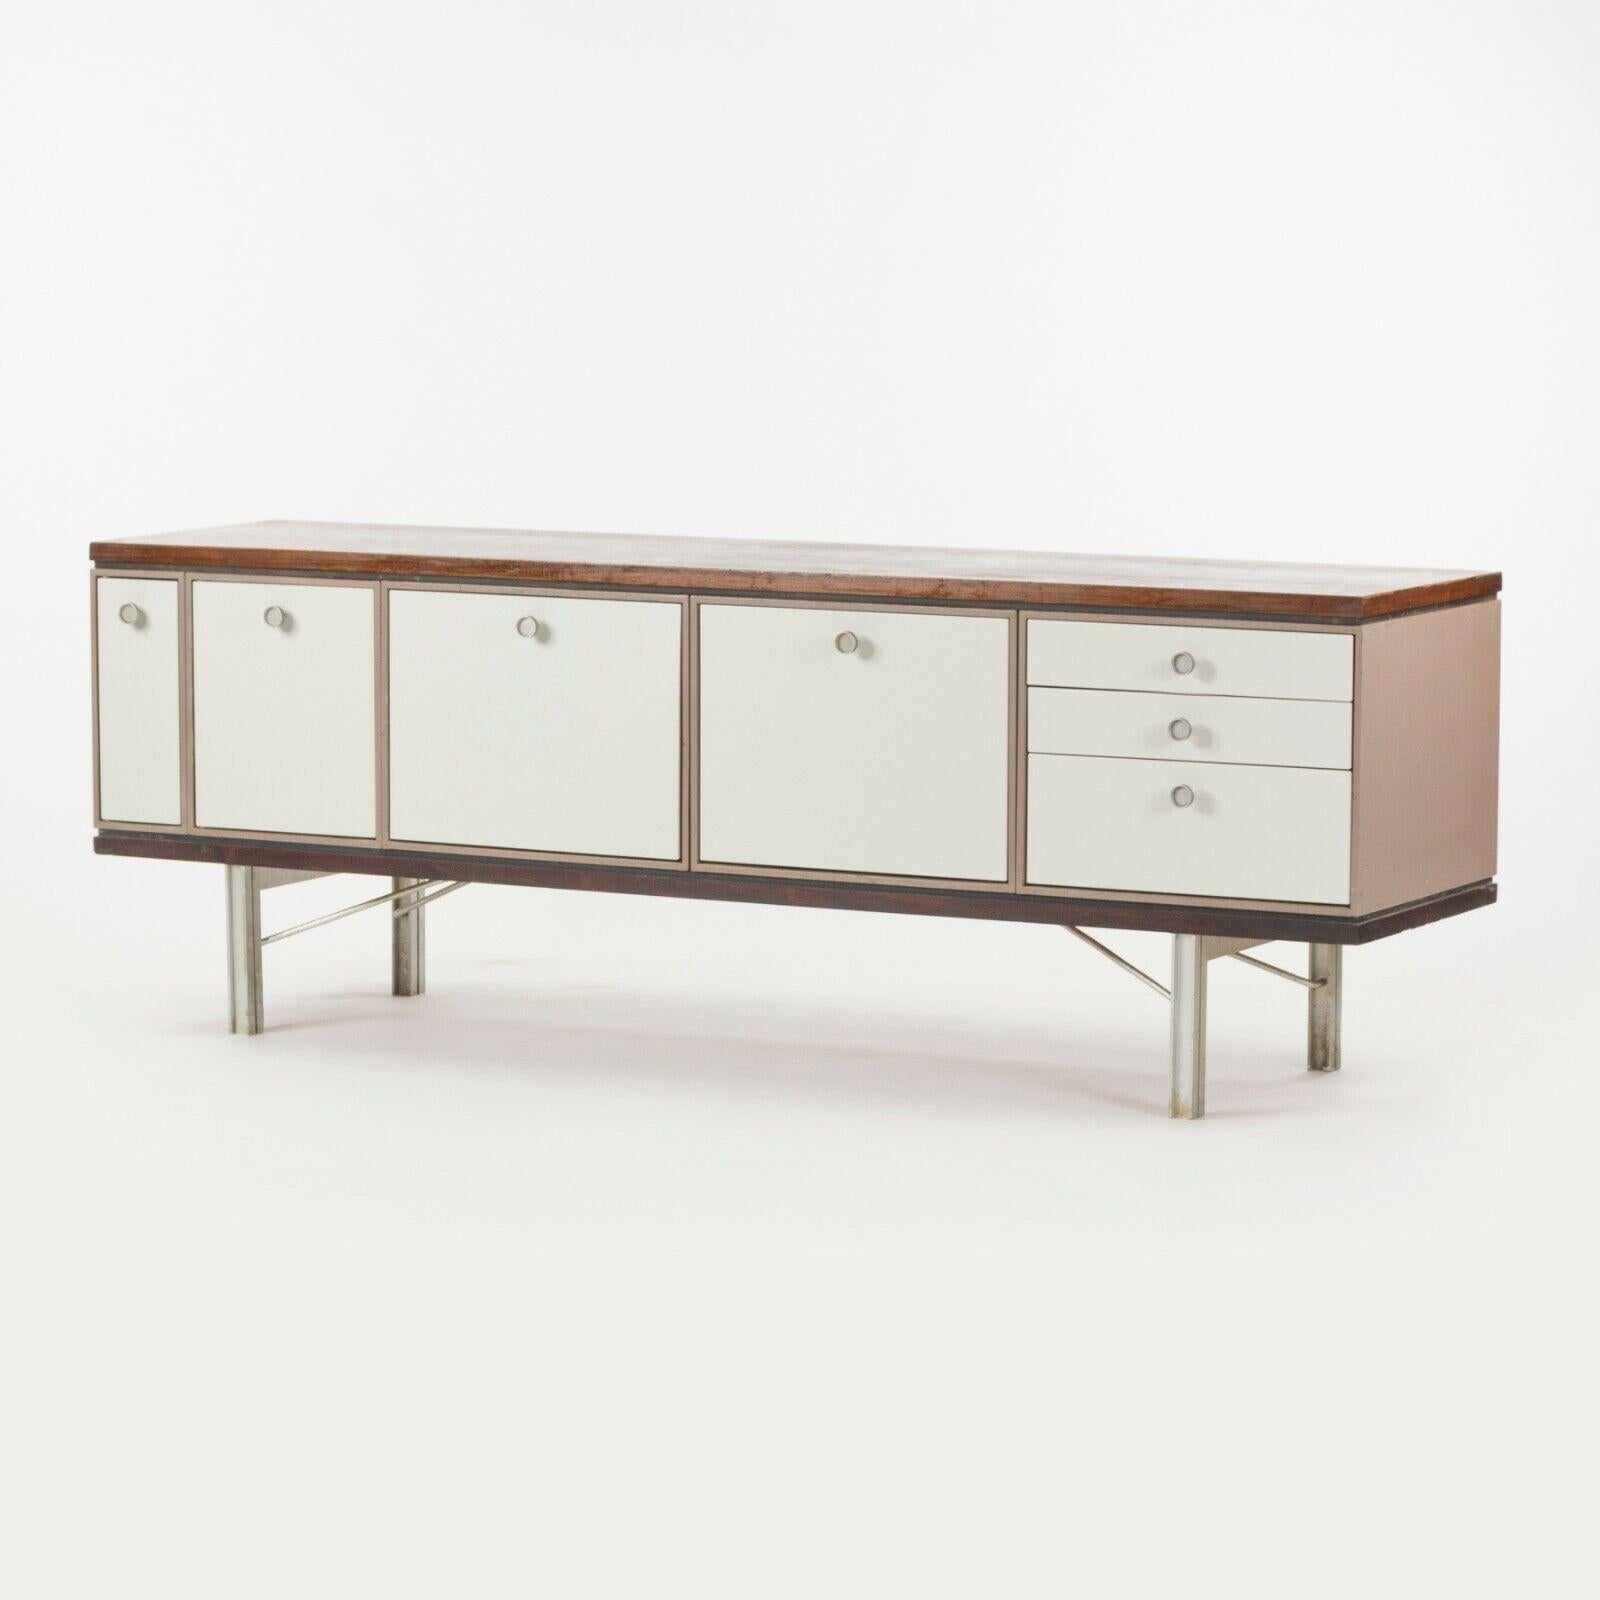 Metalwork 1960 Gerald Luss Rosewood & Metal Credenza Cabinet Once Attributed to Eames IBM For Sale